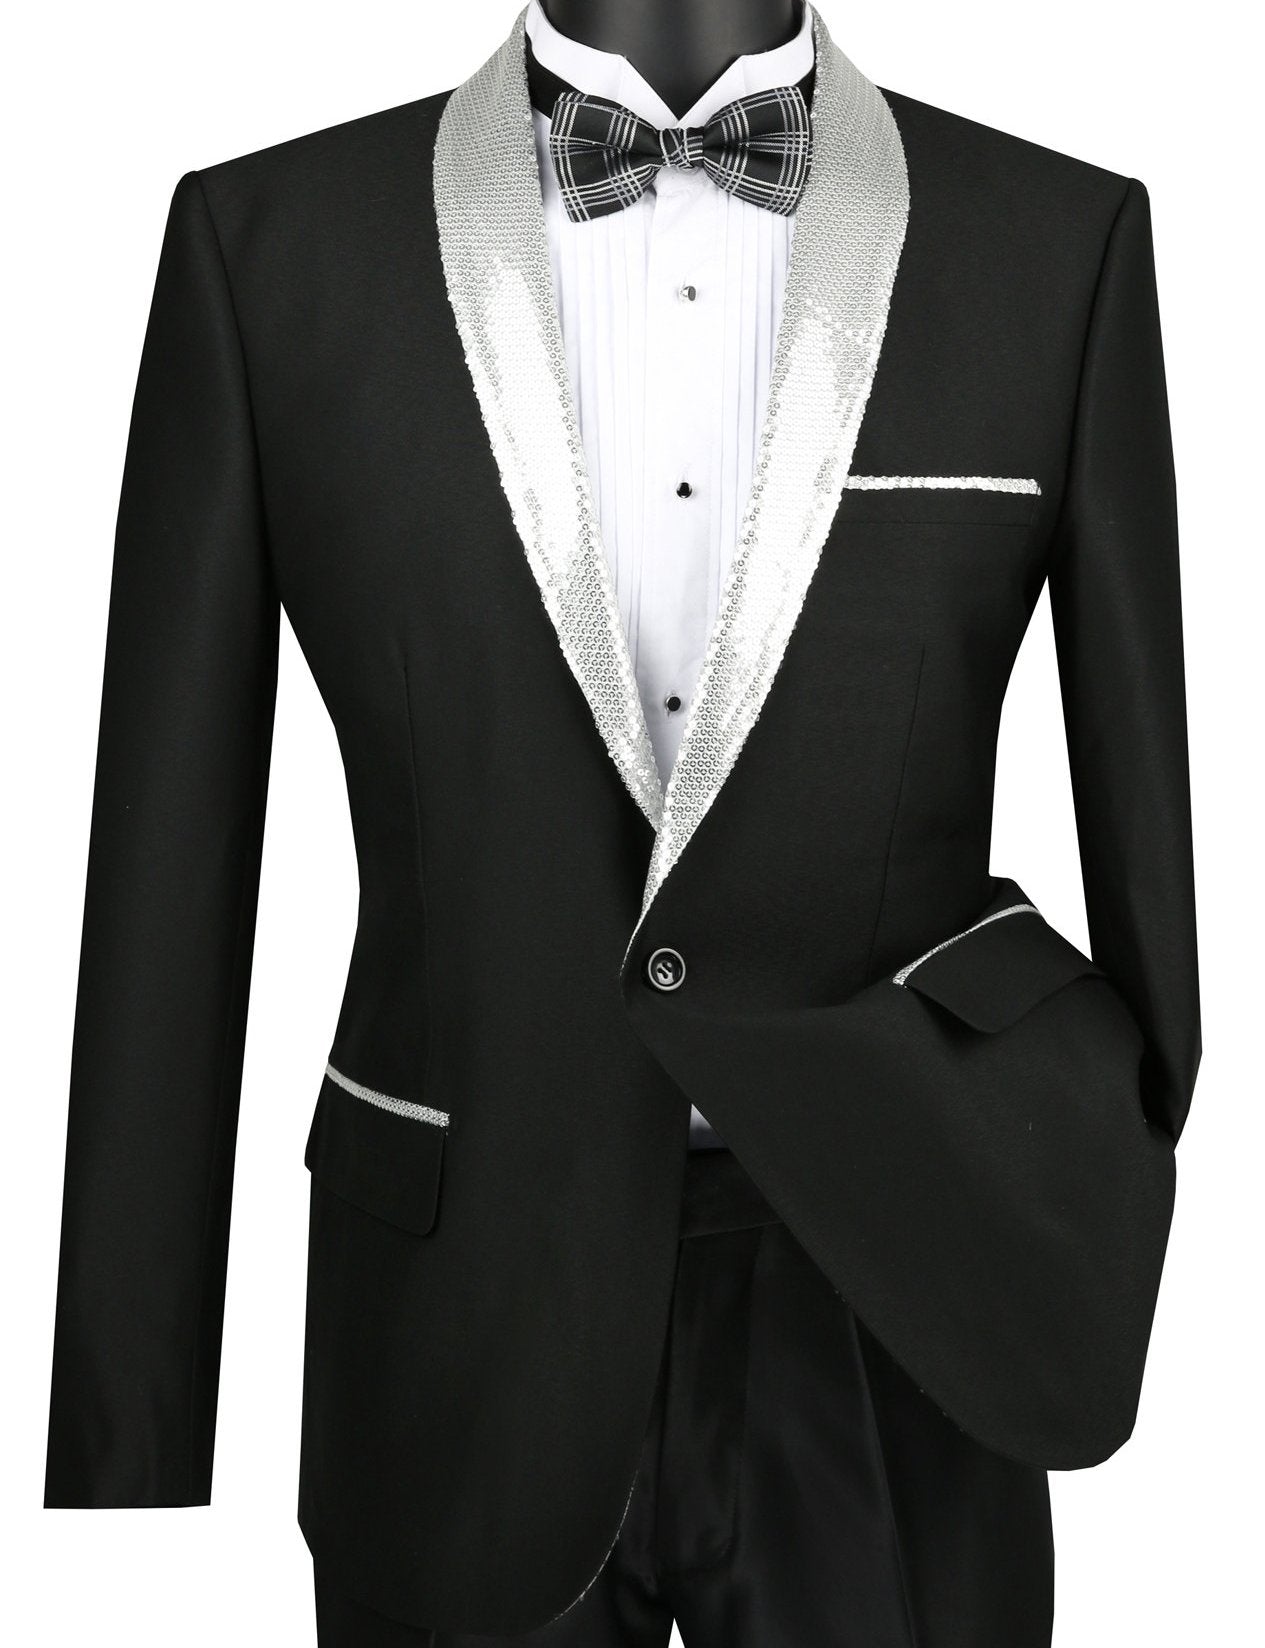 Slim Fit Black Shiny Sharkskin Party Jacket With Silver Sequins Lapel